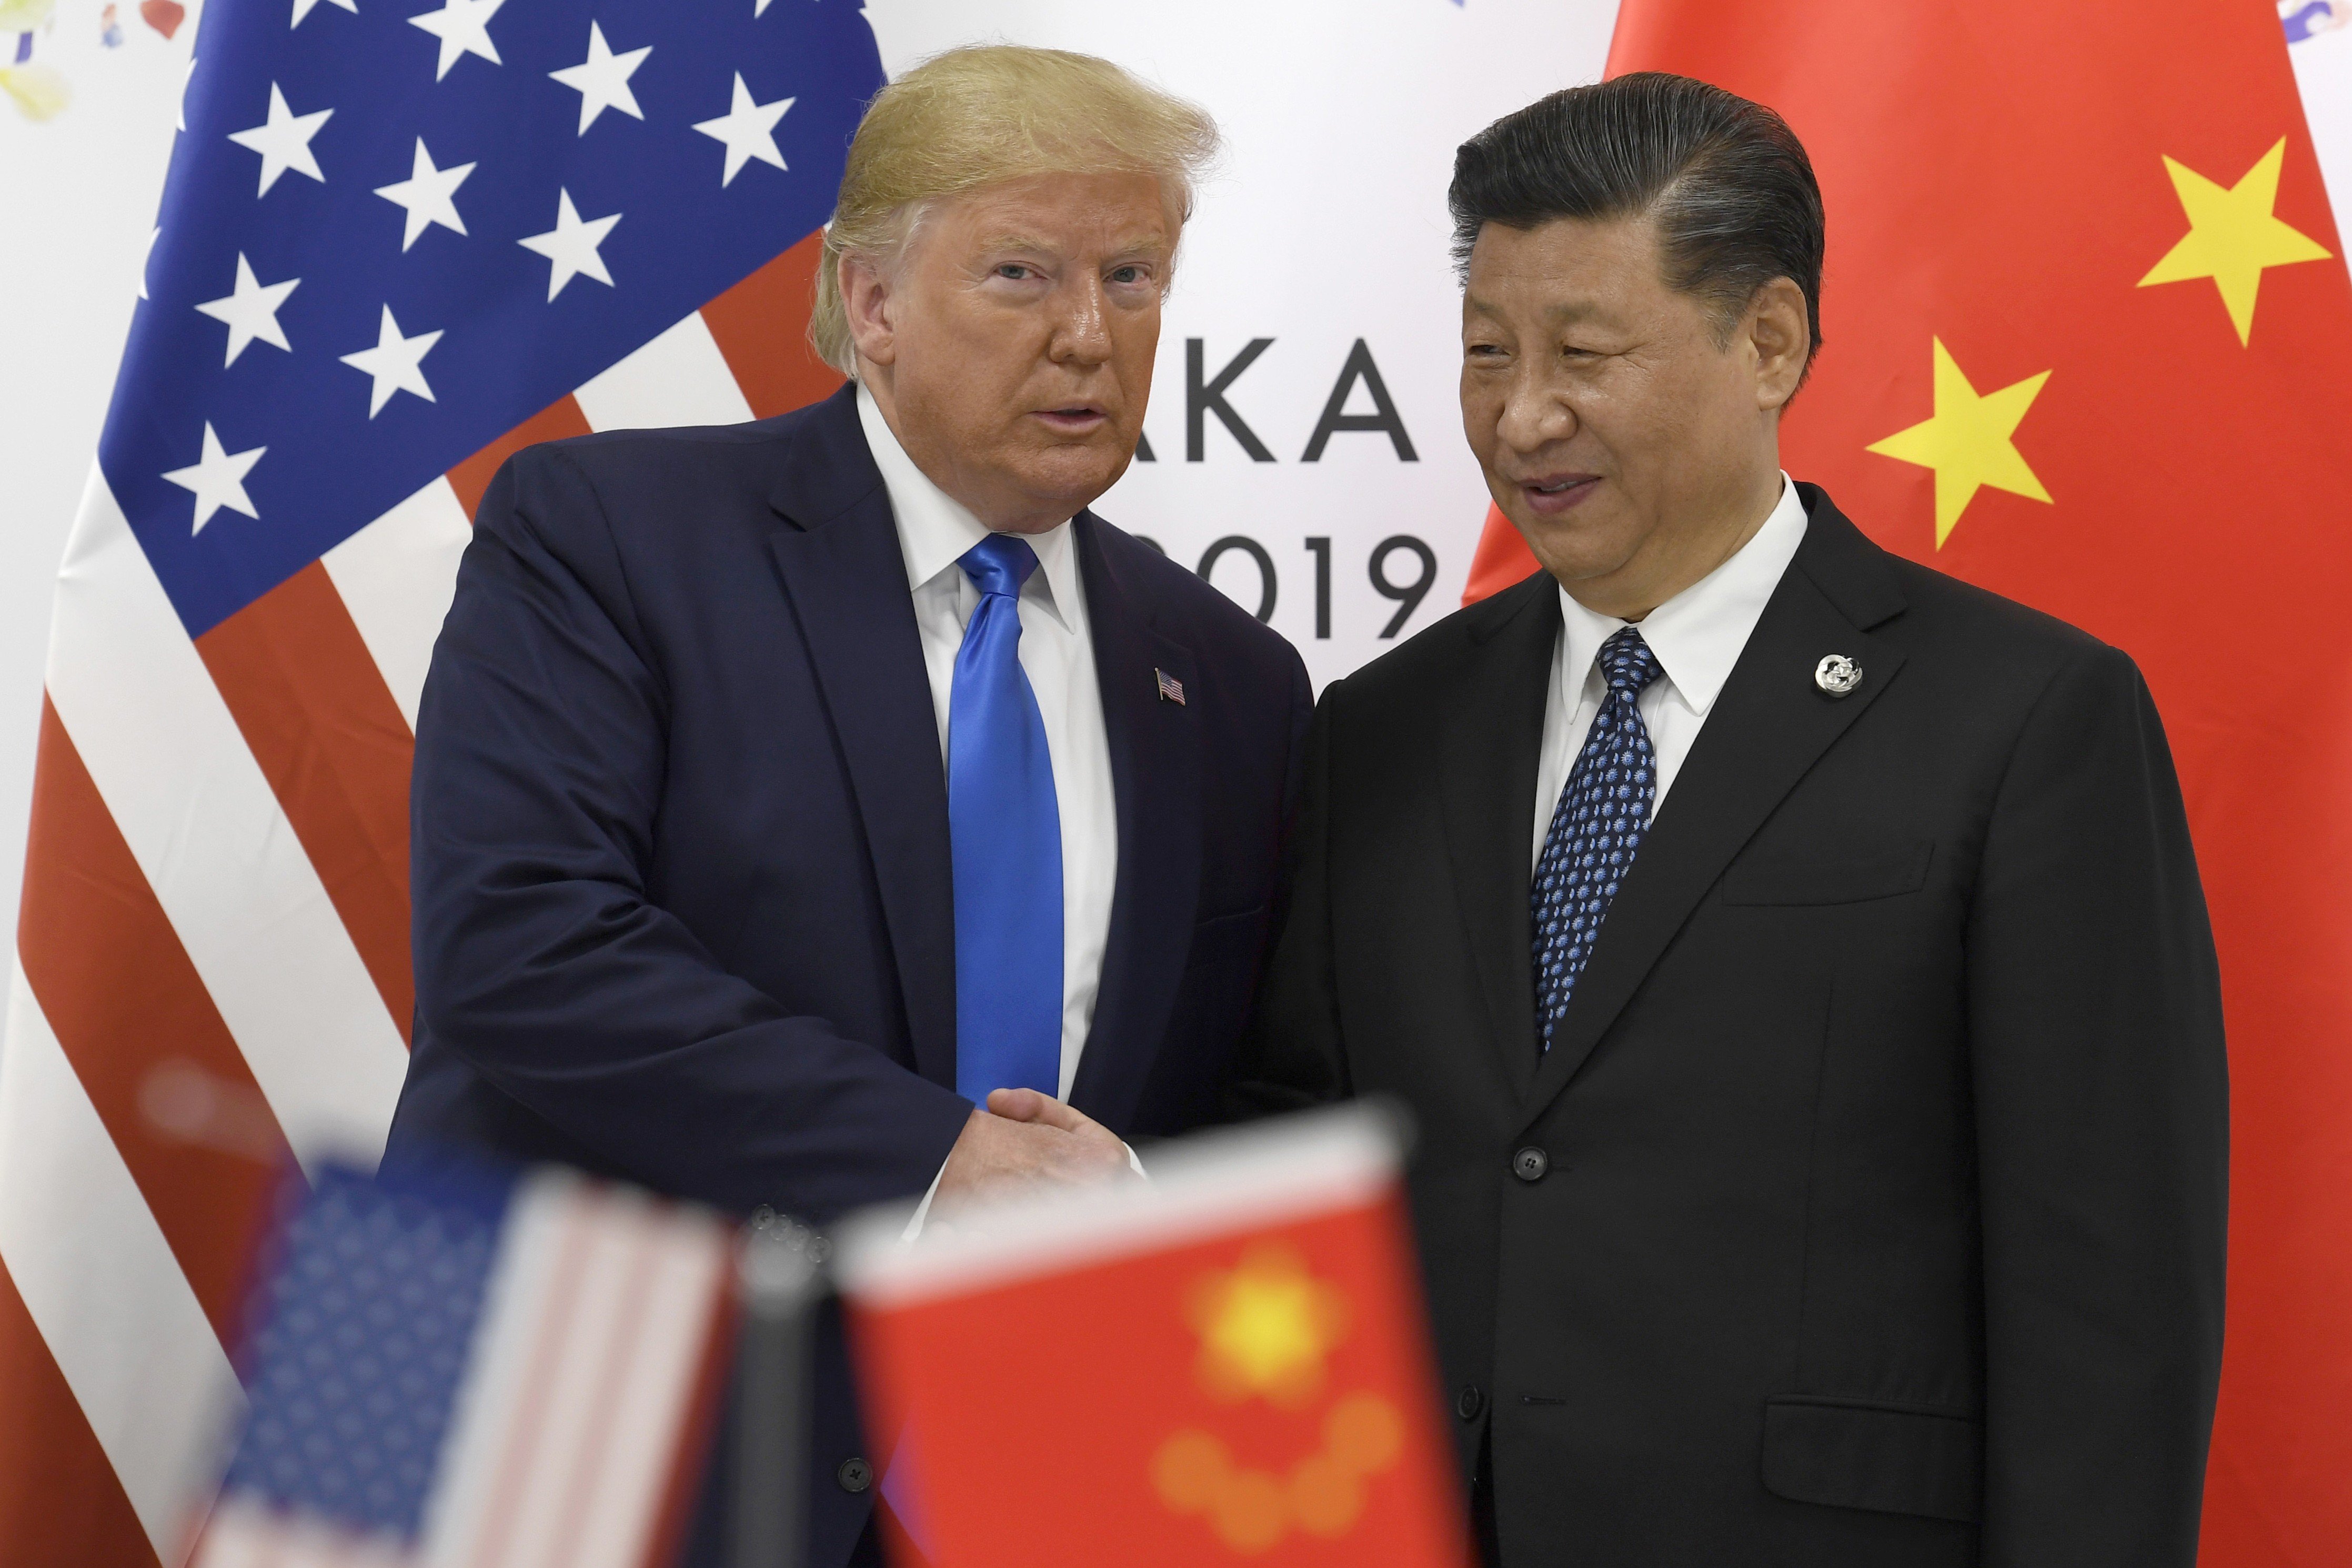 US President Donald Trump and Chinese President Xi Jinping meet on the sidelines of the G20 summit in Osaka, Japan, on June 29, 2019. File photo: AP